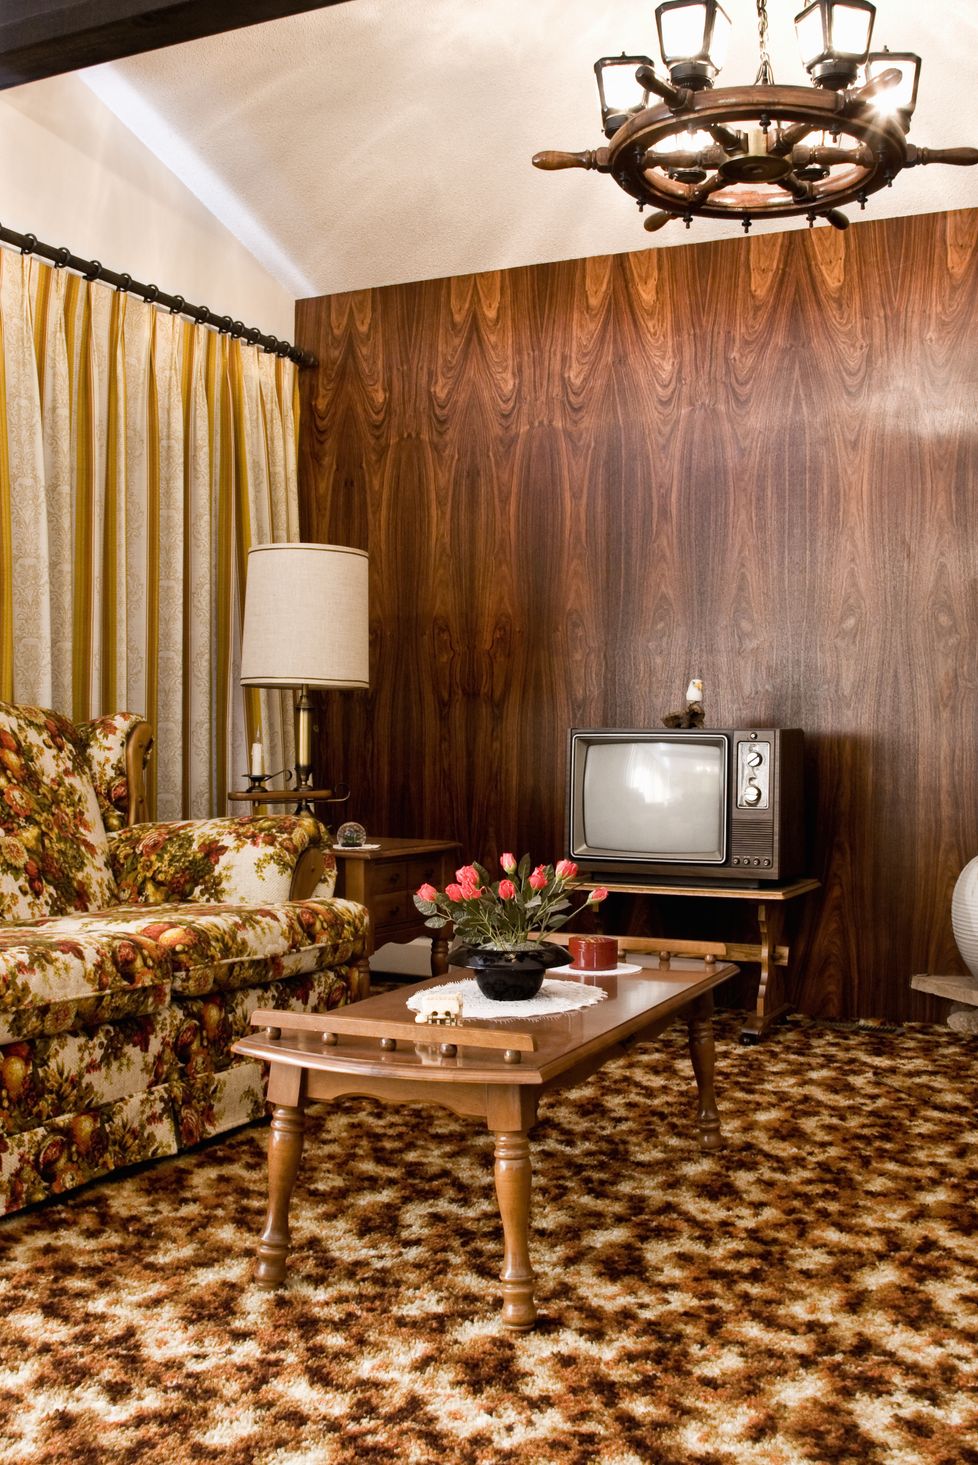 The Best Decorating Trends From the 70s - 70s Decorating Ideas